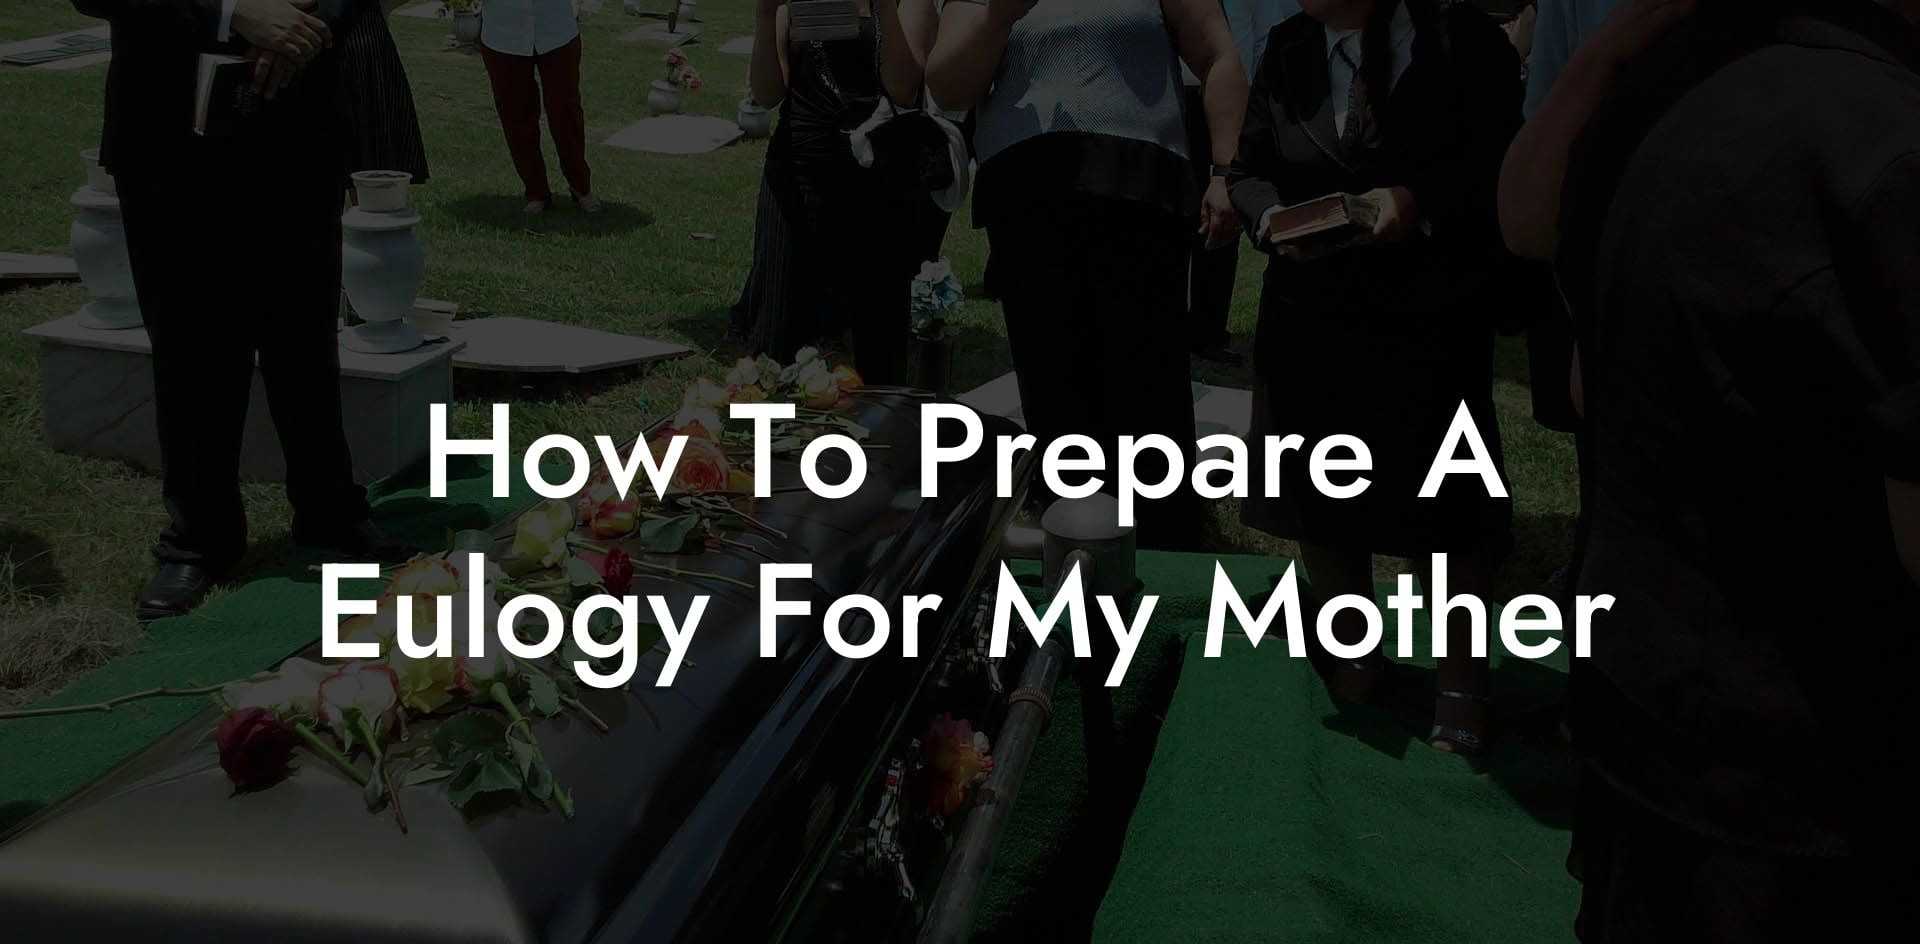 How To Prepare A Eulogy For My Mother